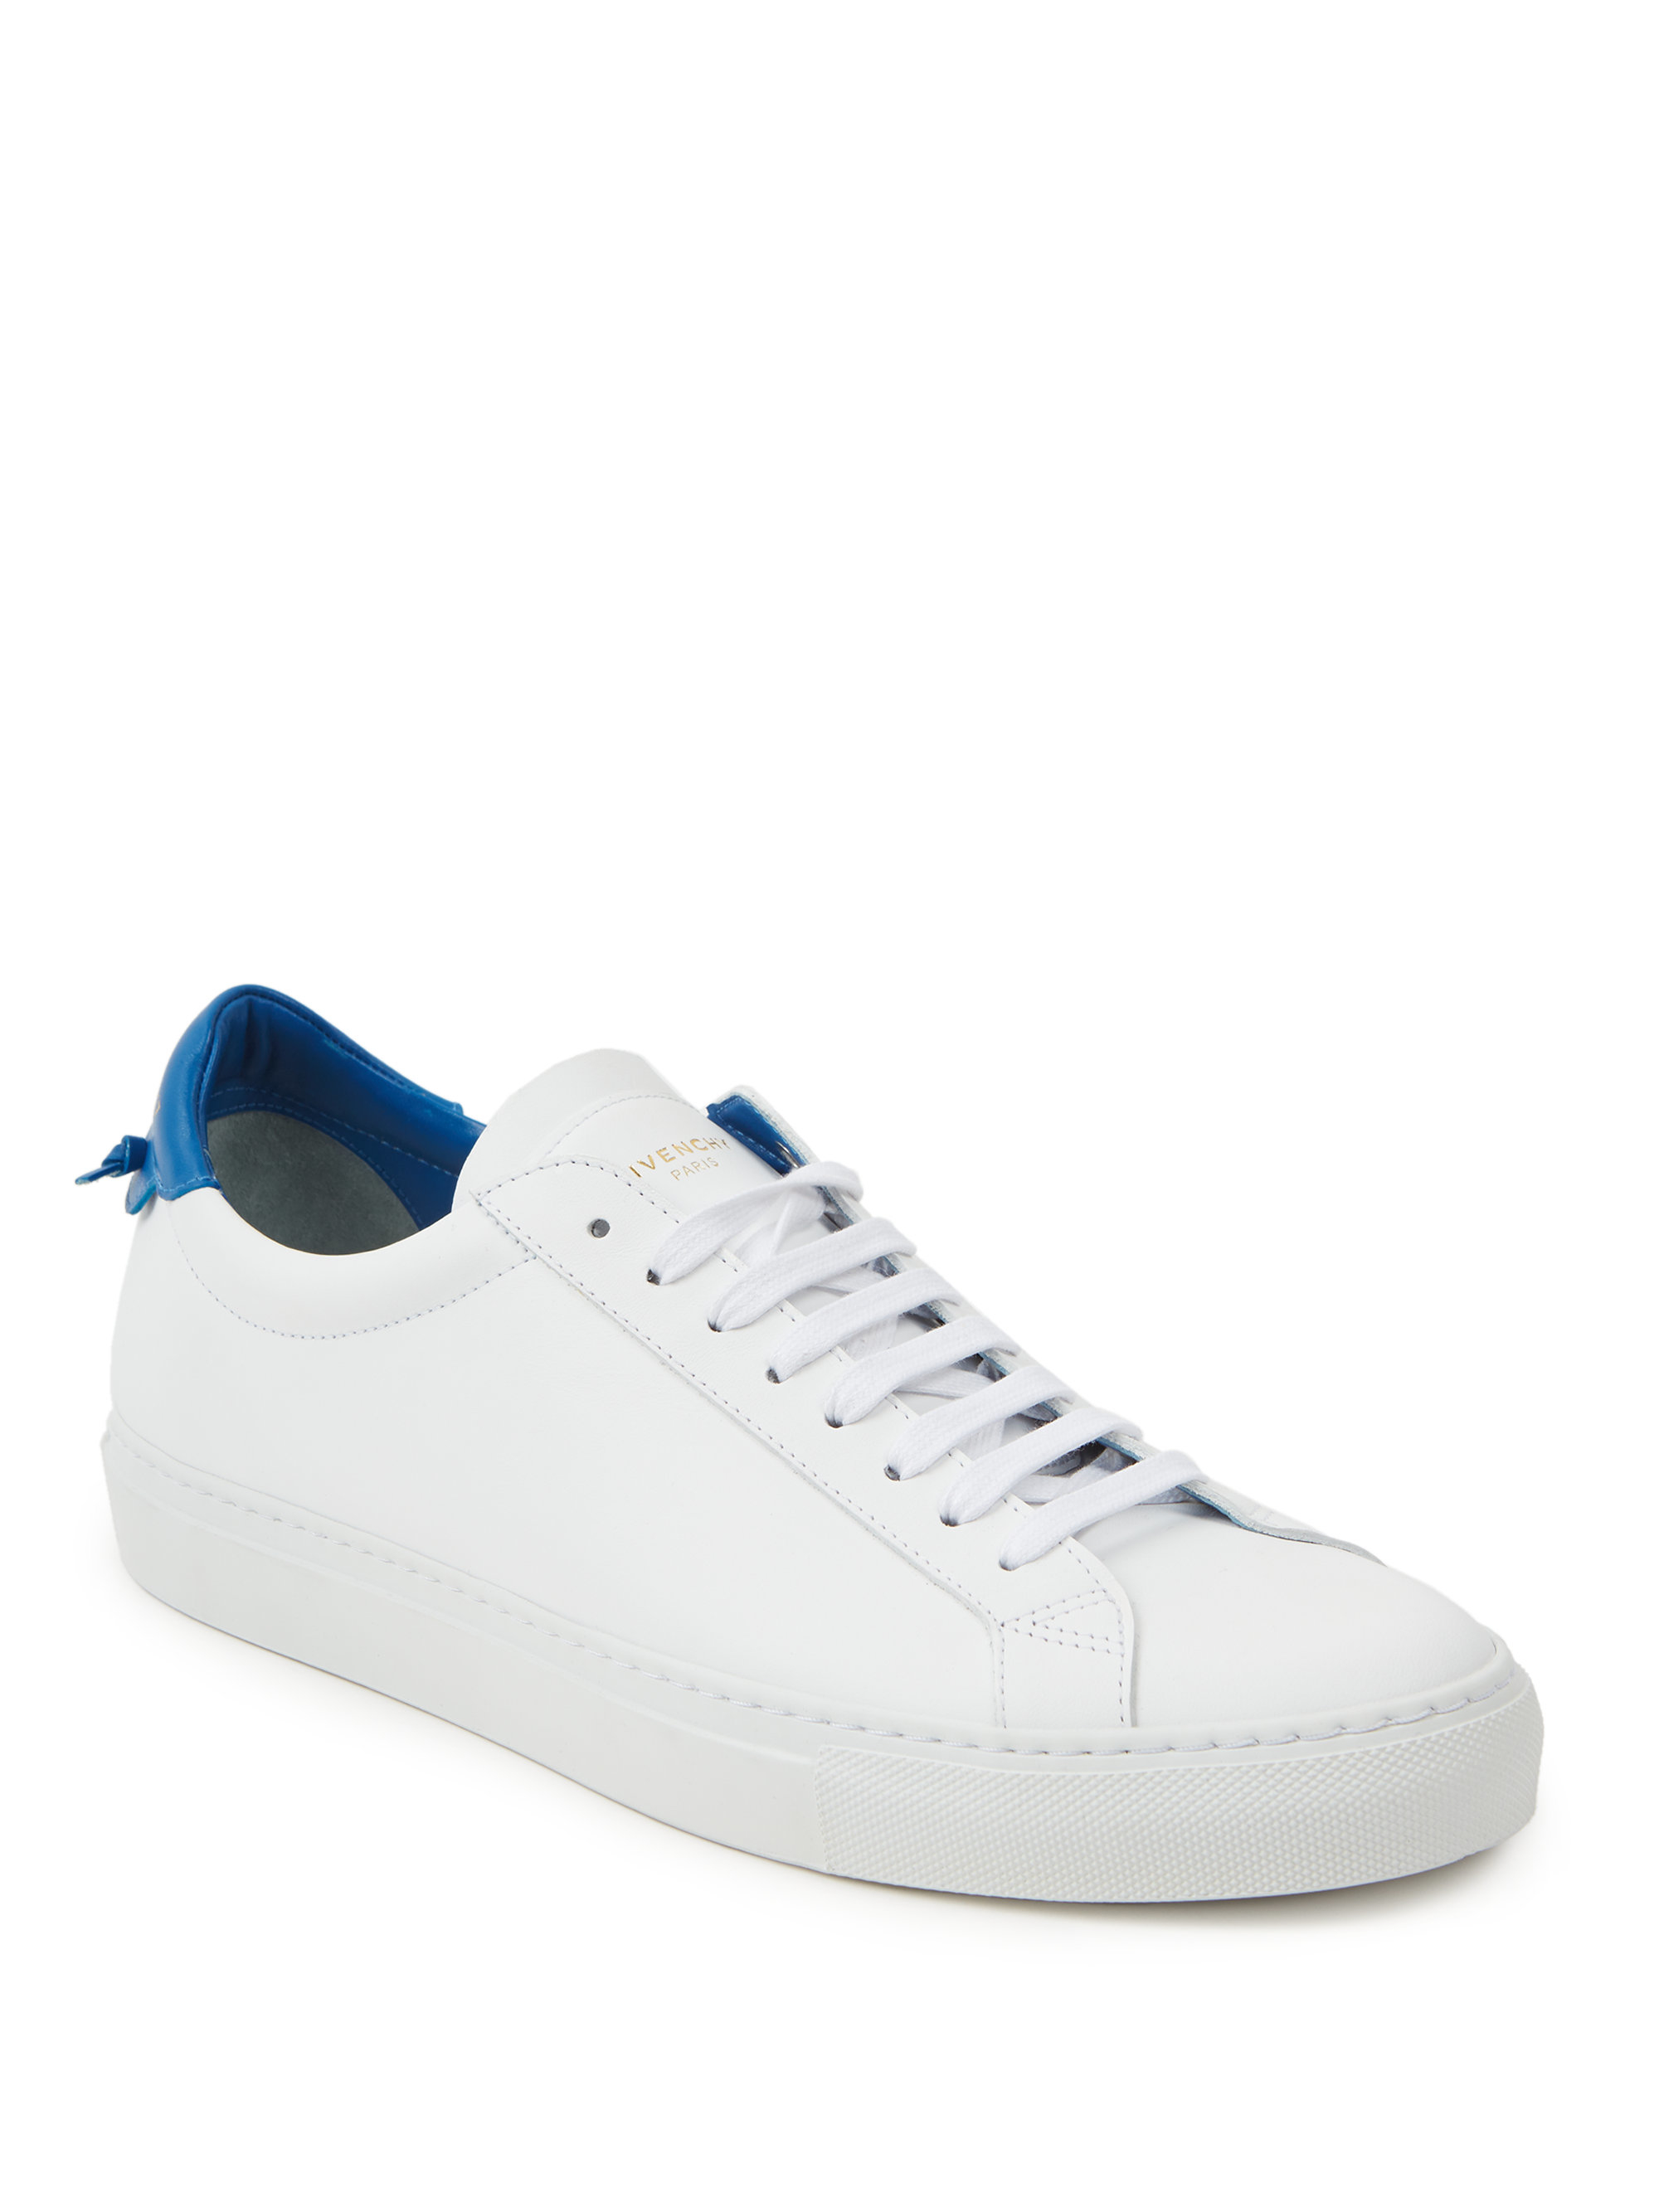 Lyst - Givenchy Knots Low Lace-up Sneakers in White